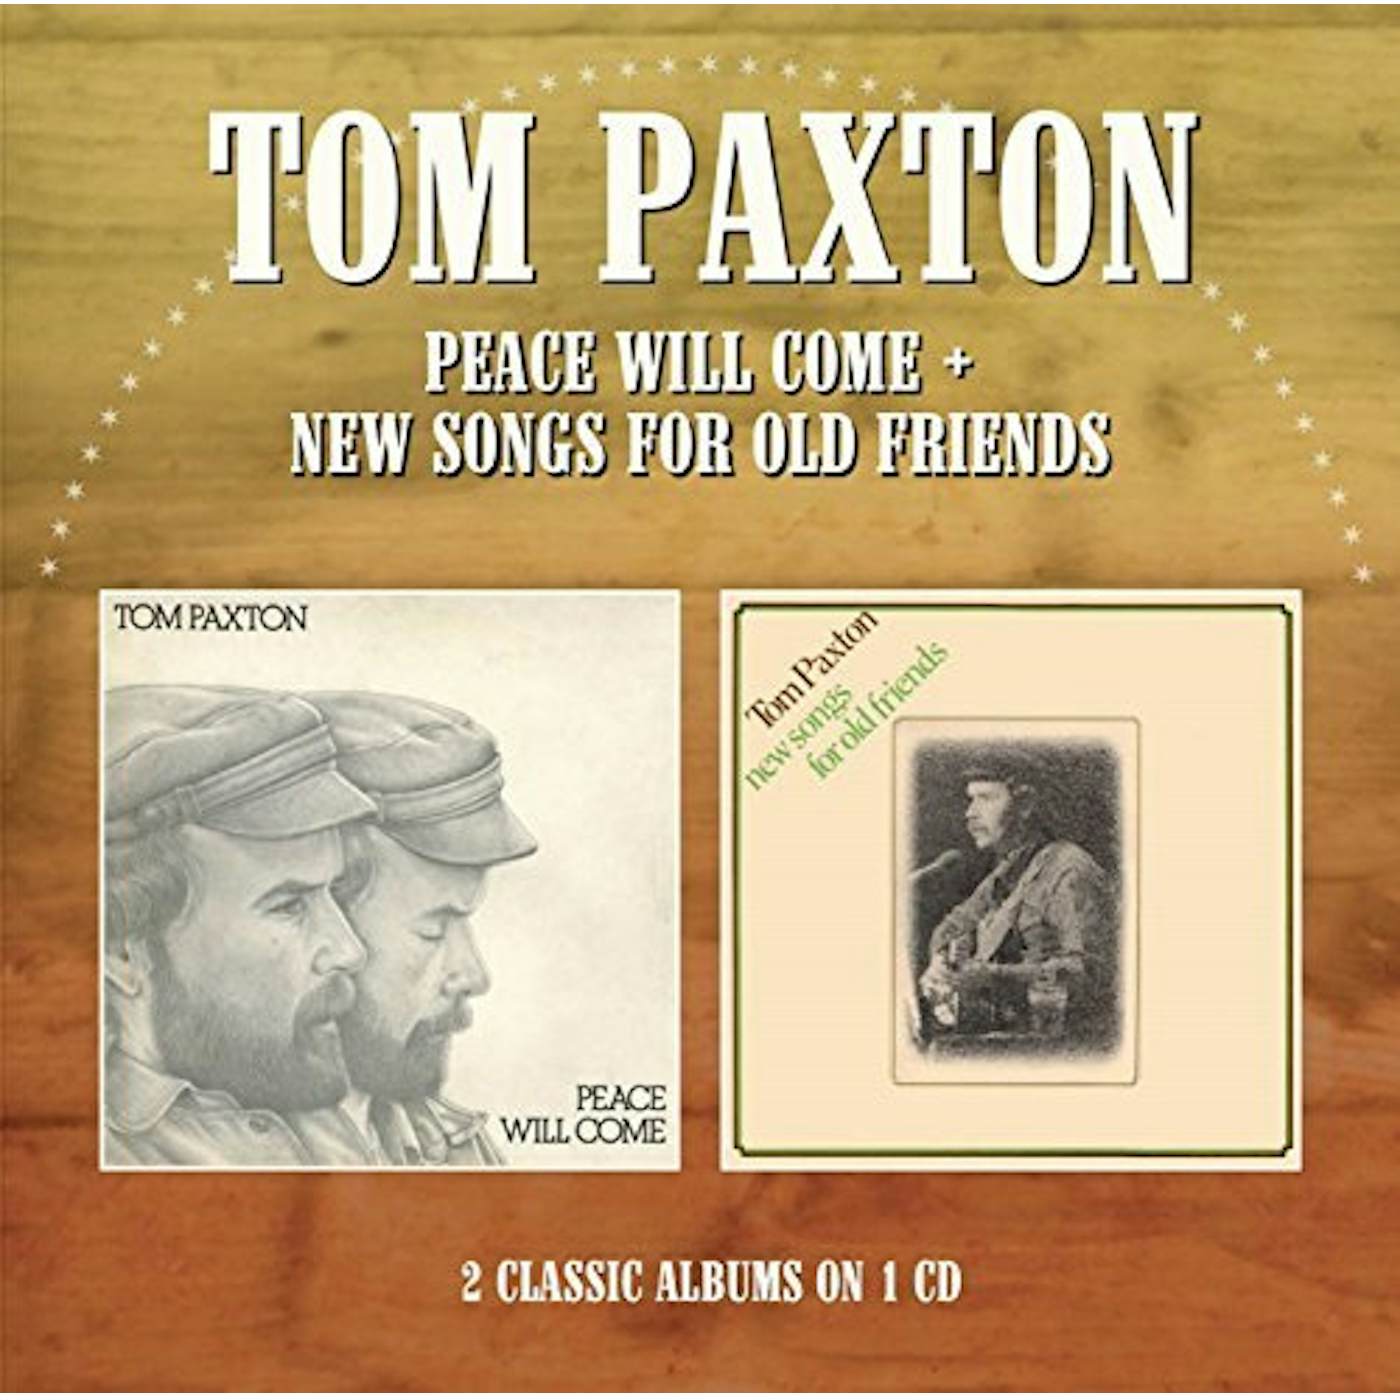 Tom Paxton PEACE WILL COME / NEW SONGS FOR OLD FRIENDS CD